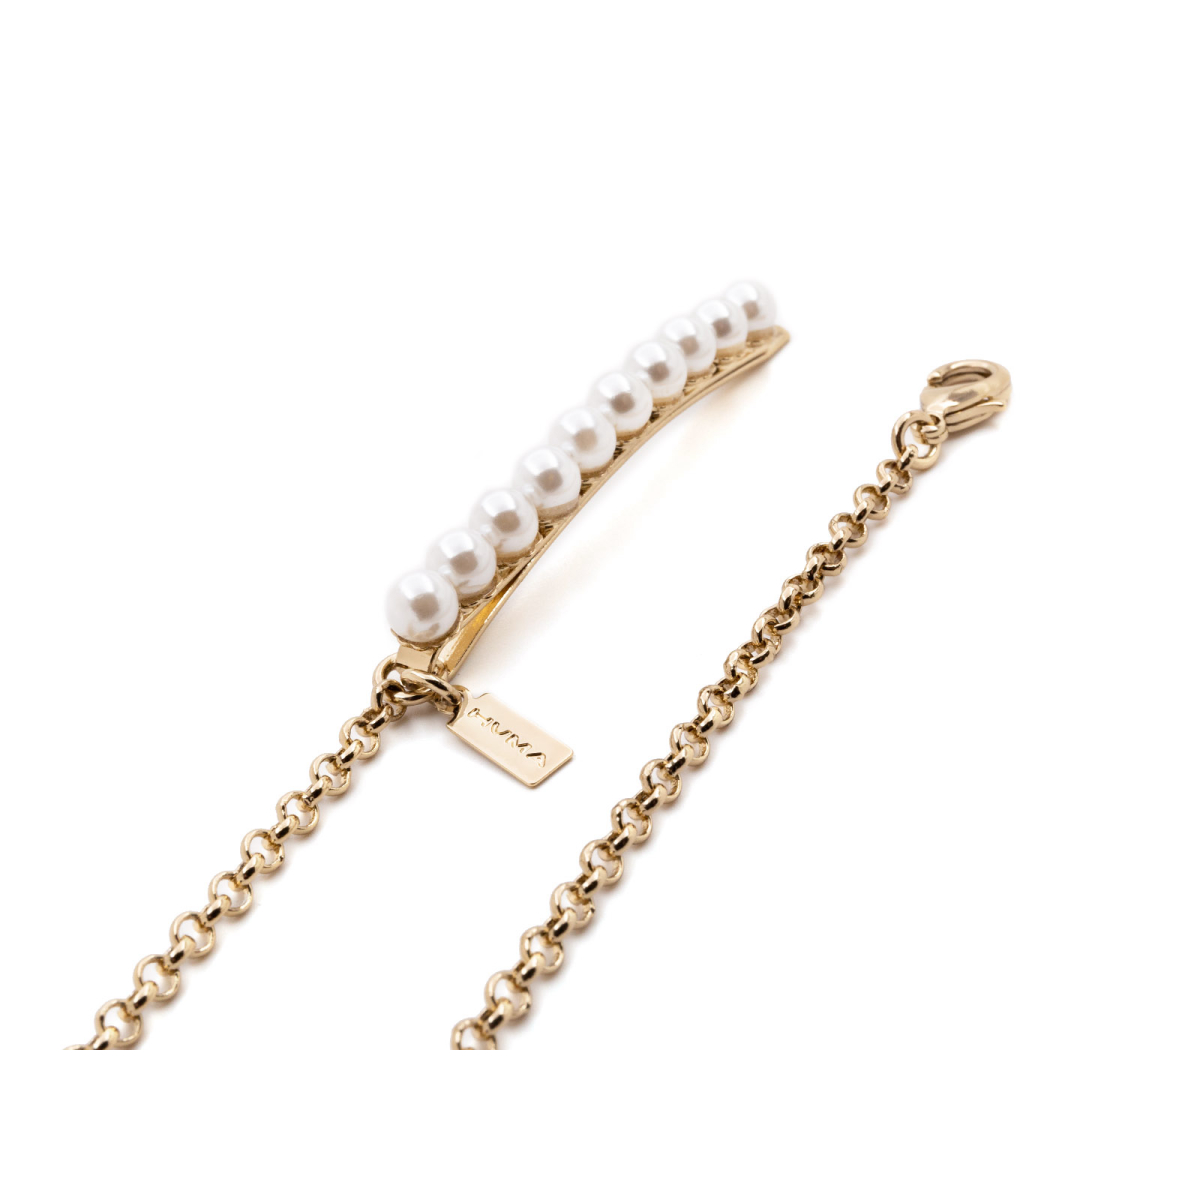 Huma® Accessories: Earring Pearls Clip Hair color Gold E31 - product thumbnail 1/3.